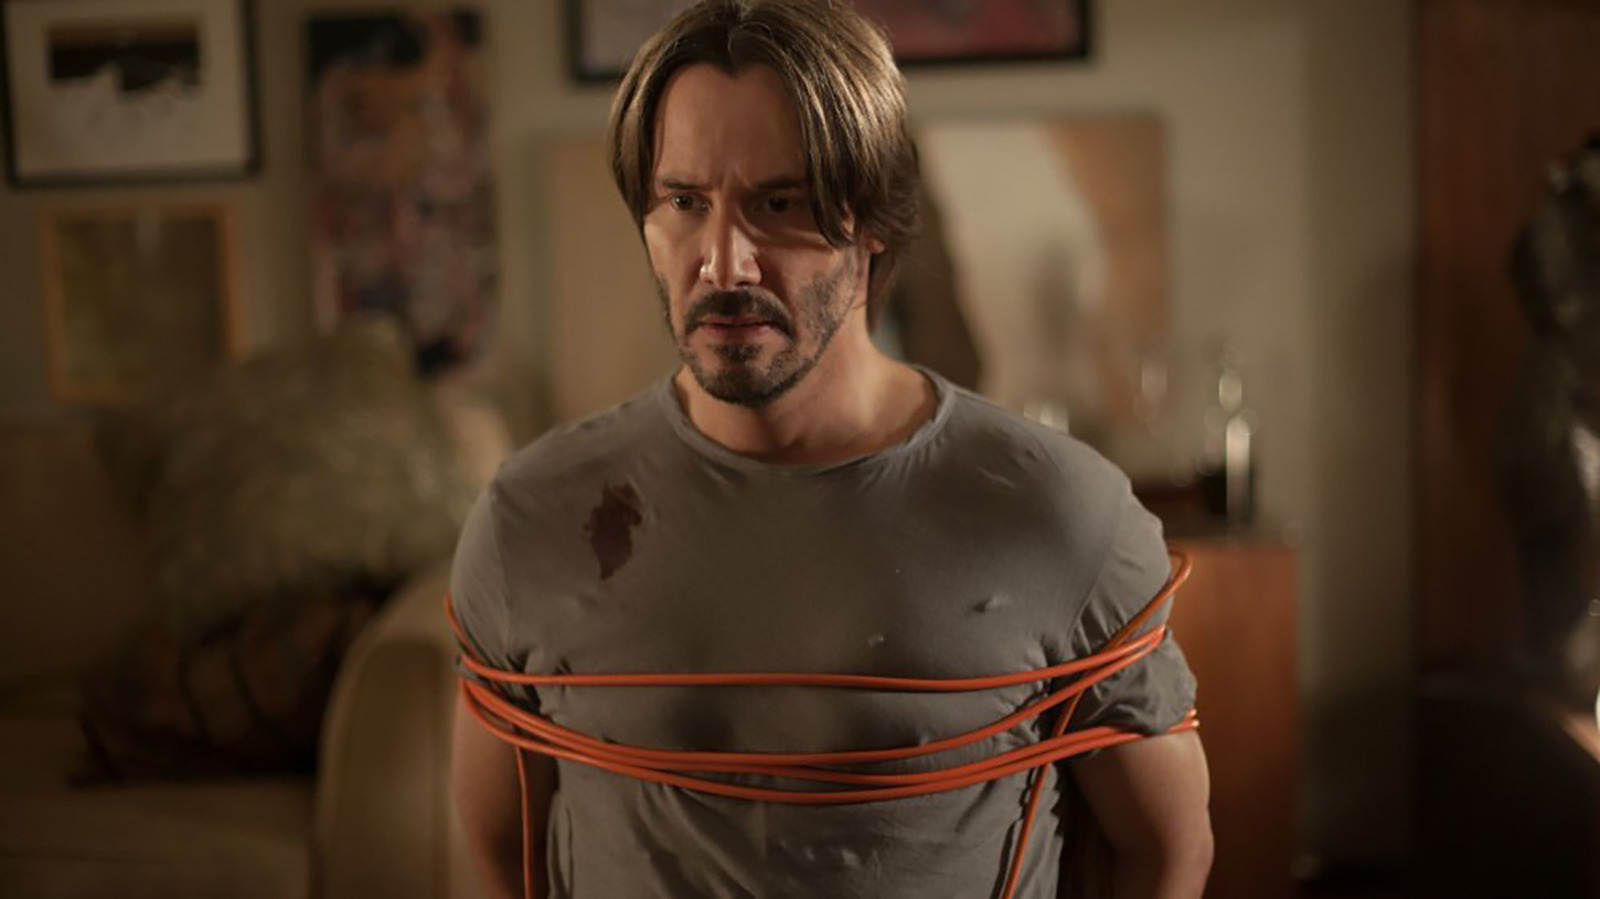 An Erotic Keanu Reeves And Ana De Armas Thriller Is Now One Of Netflix's  Most-Watched Movies